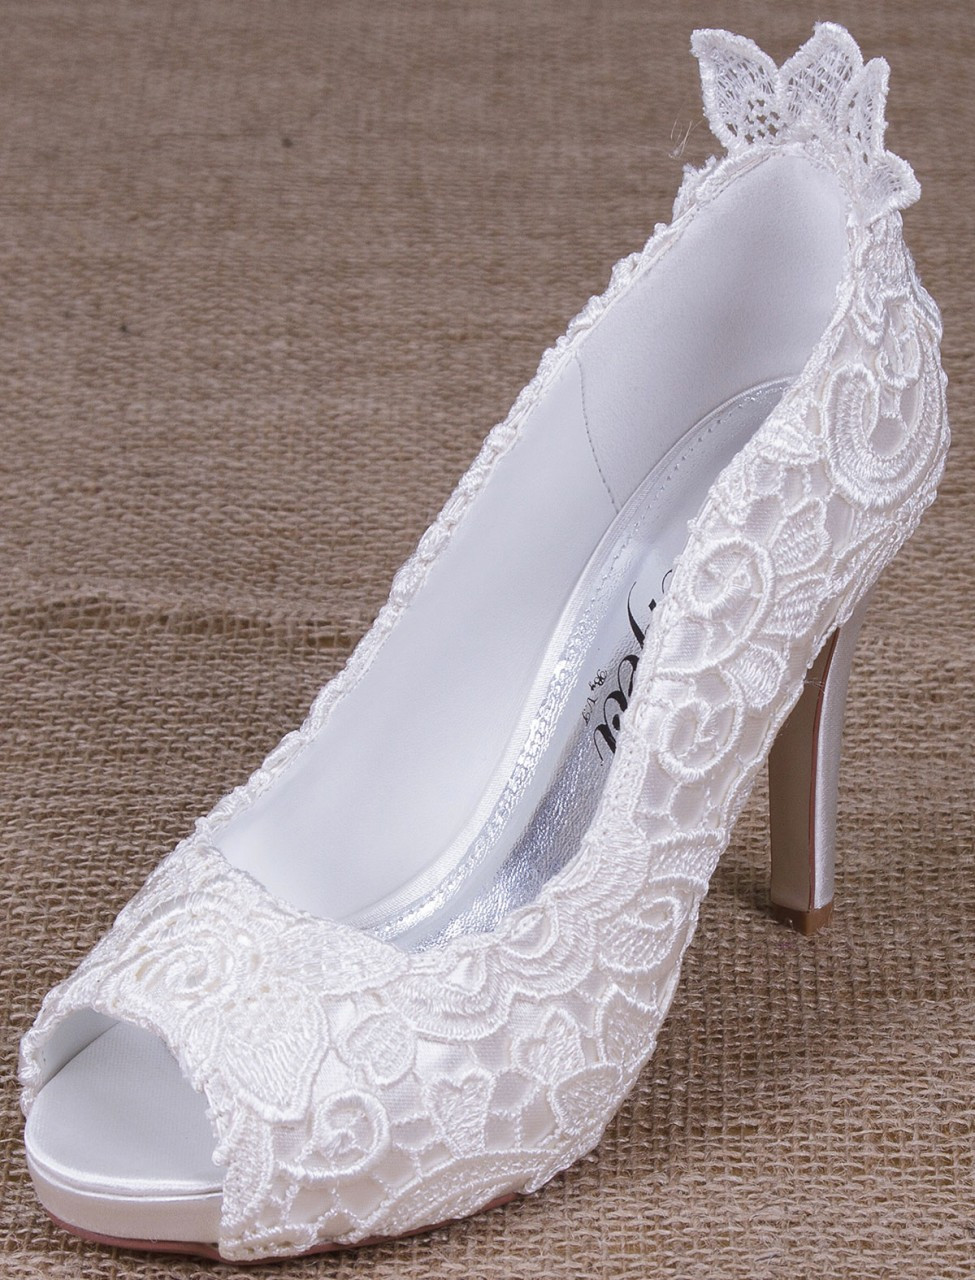 Ivory Lace Wedding Shoes
 Polly Perfect Bridal Shoes Wedding Shoes Ivory Lace